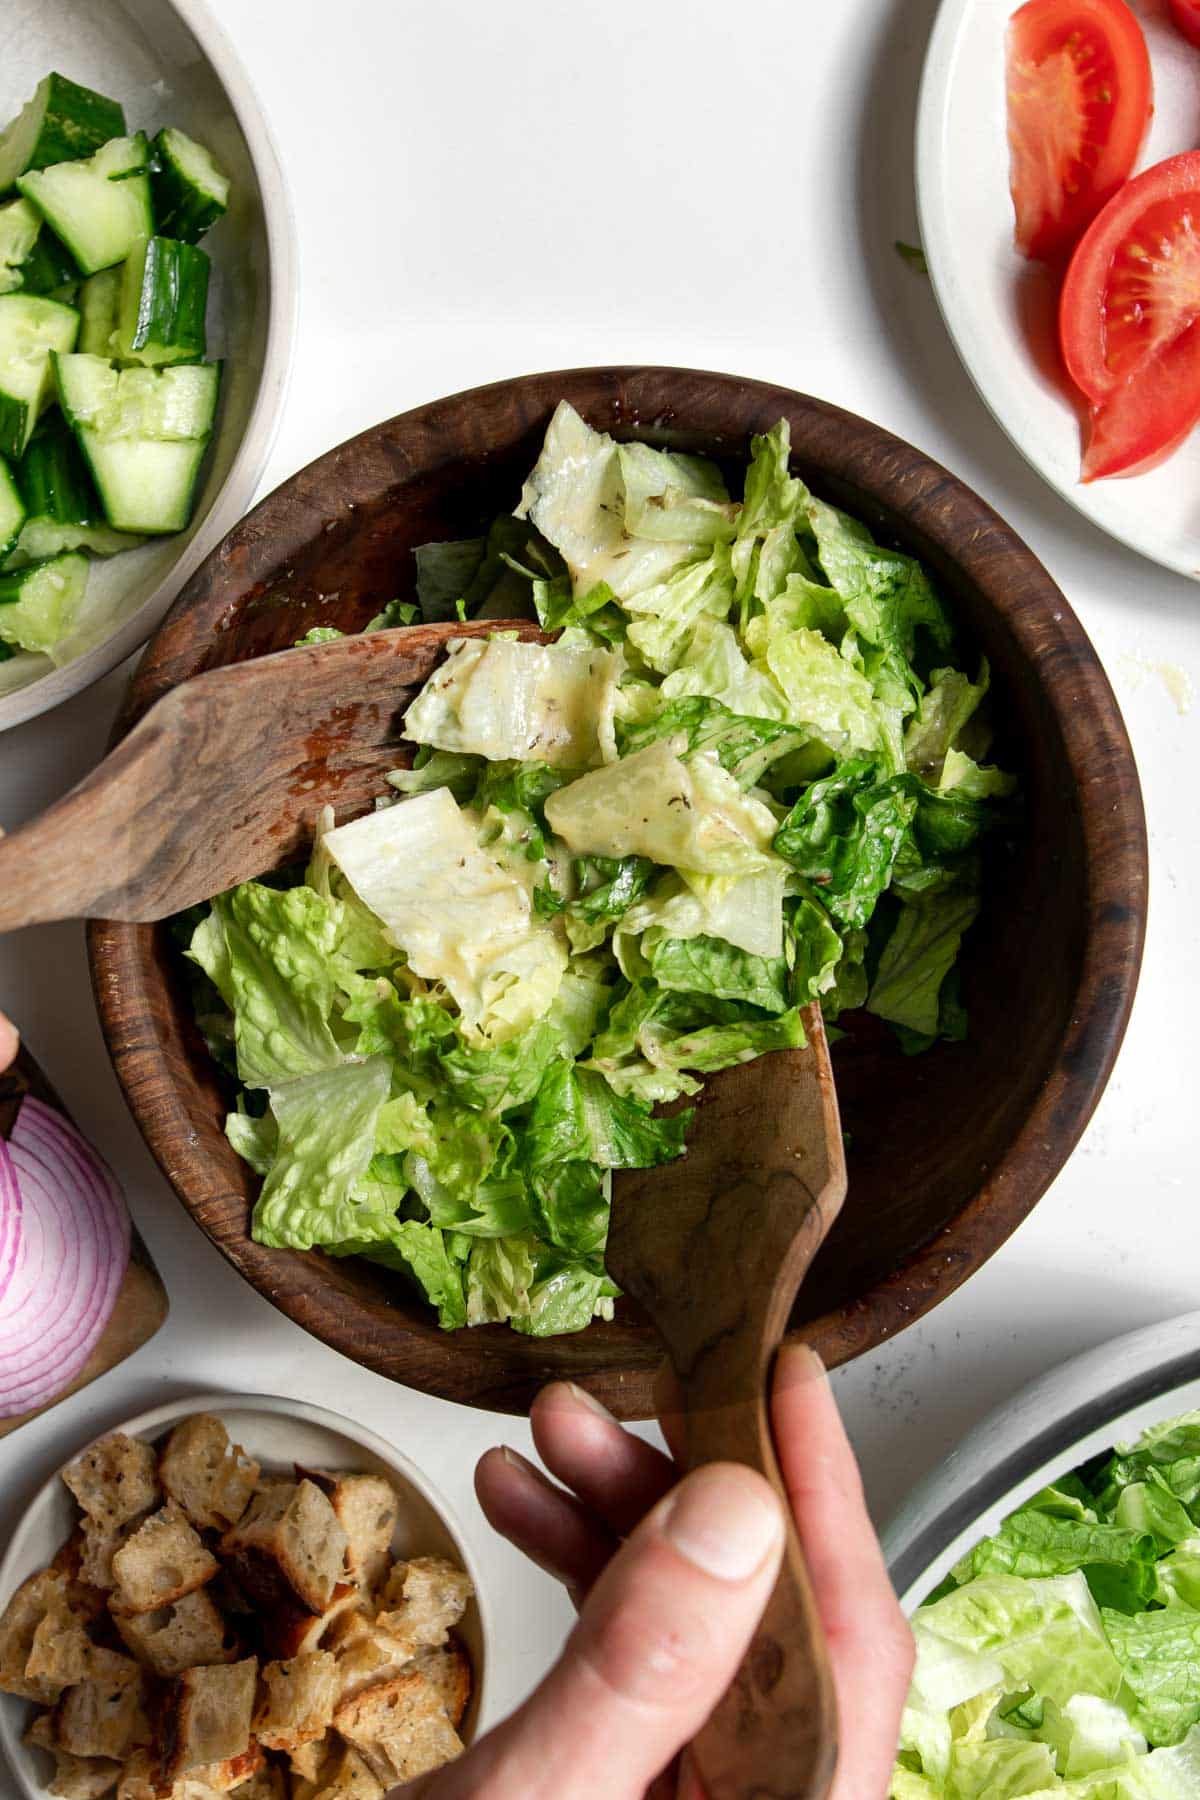 Hands tossing romaine lettuce with honey Dijon vinaigrette with ingredients around it.